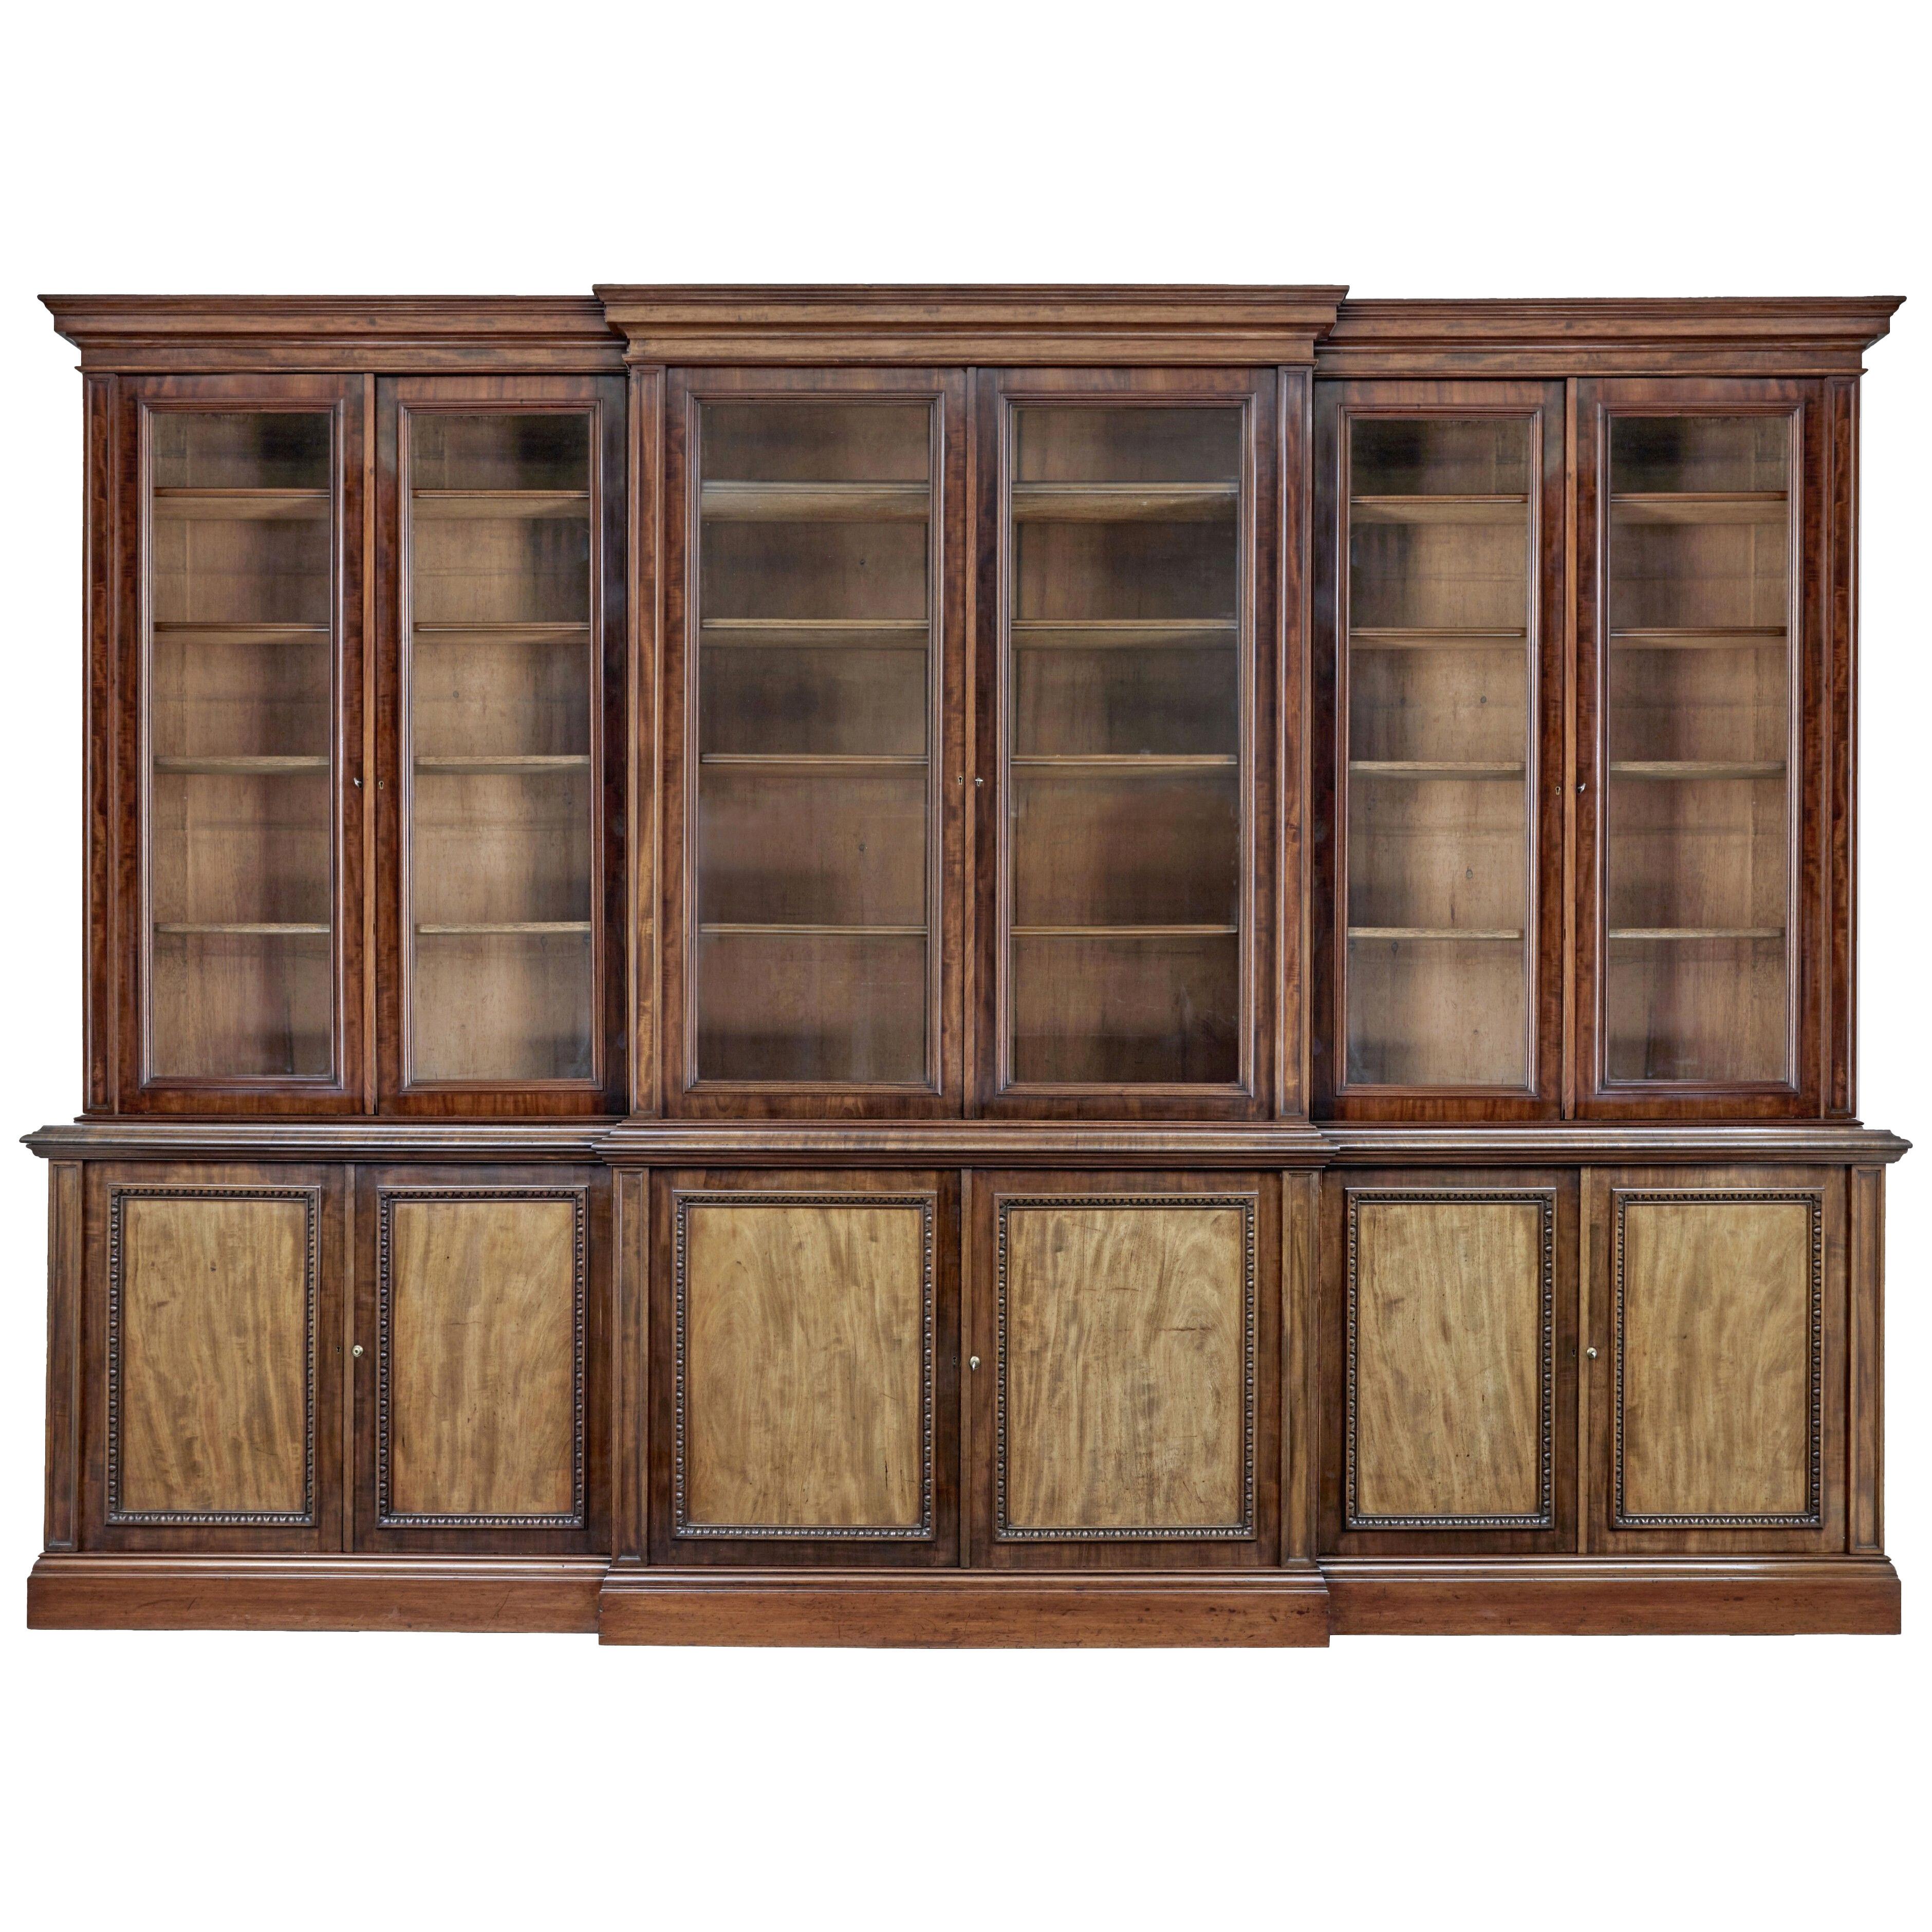 FINE QUALITY 19TH CENTURY MAHOGANY BREAKFRONT BOOKCASE OF LARGE PROPORTIONS